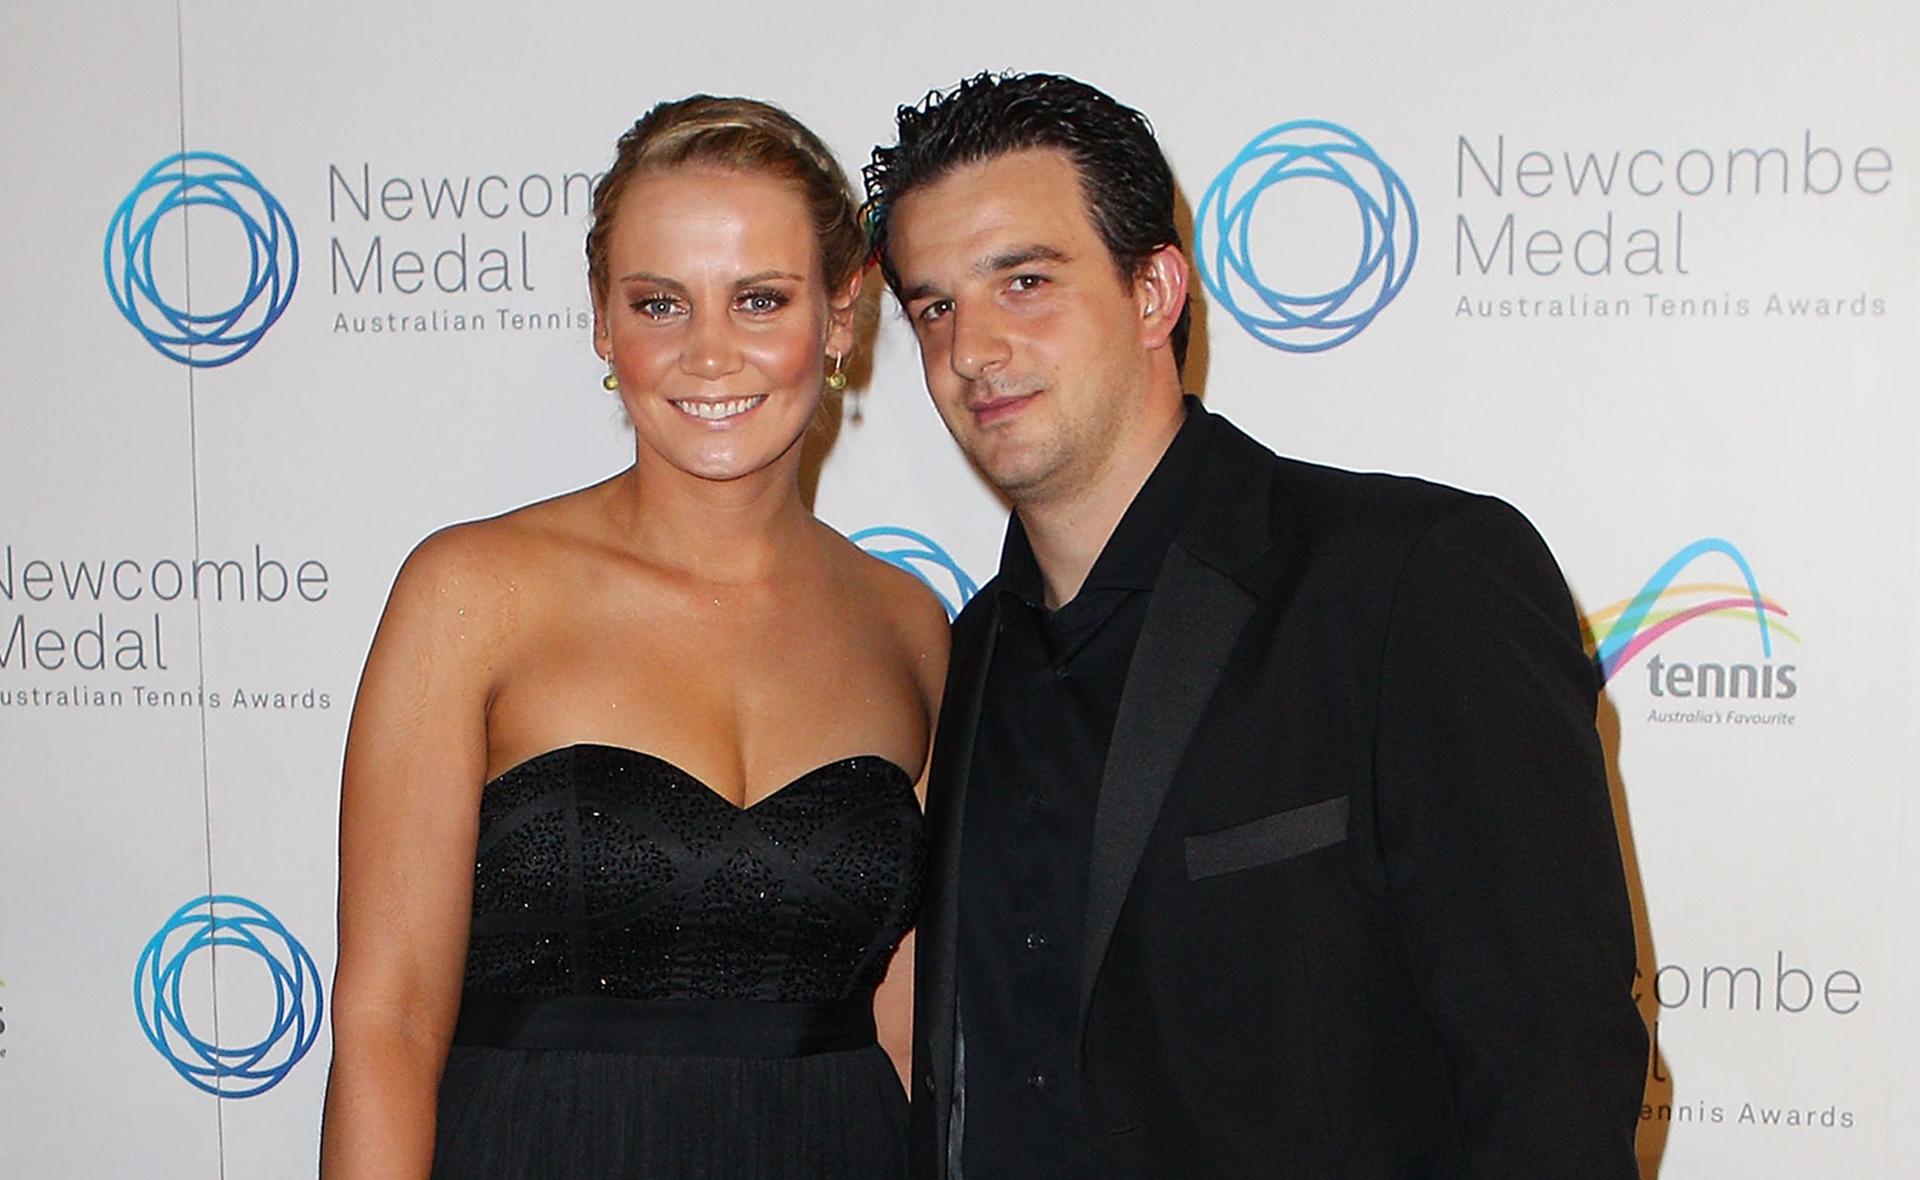 “I am lost”: Jelena Dokic’s heartbreaking announcement after nearly 19 years with partner Tin Bikic